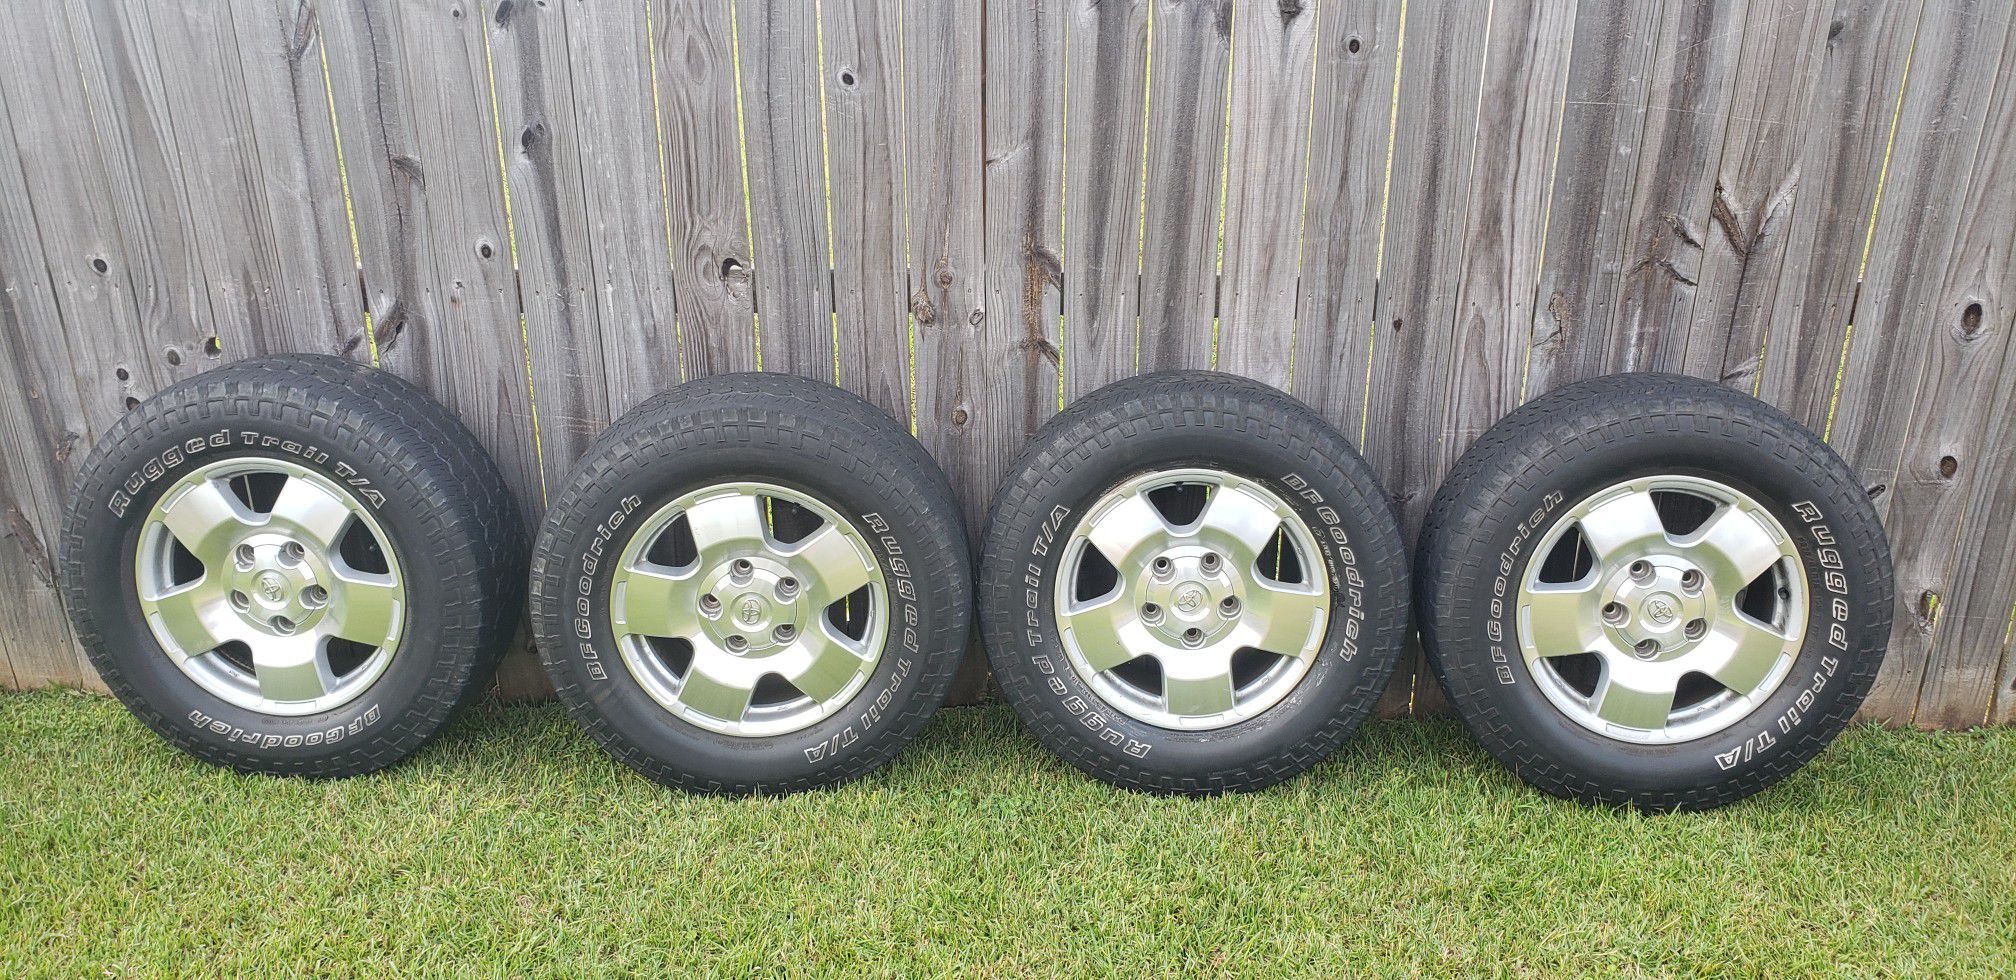 Four size 18 Toyota Tundra rim and tires